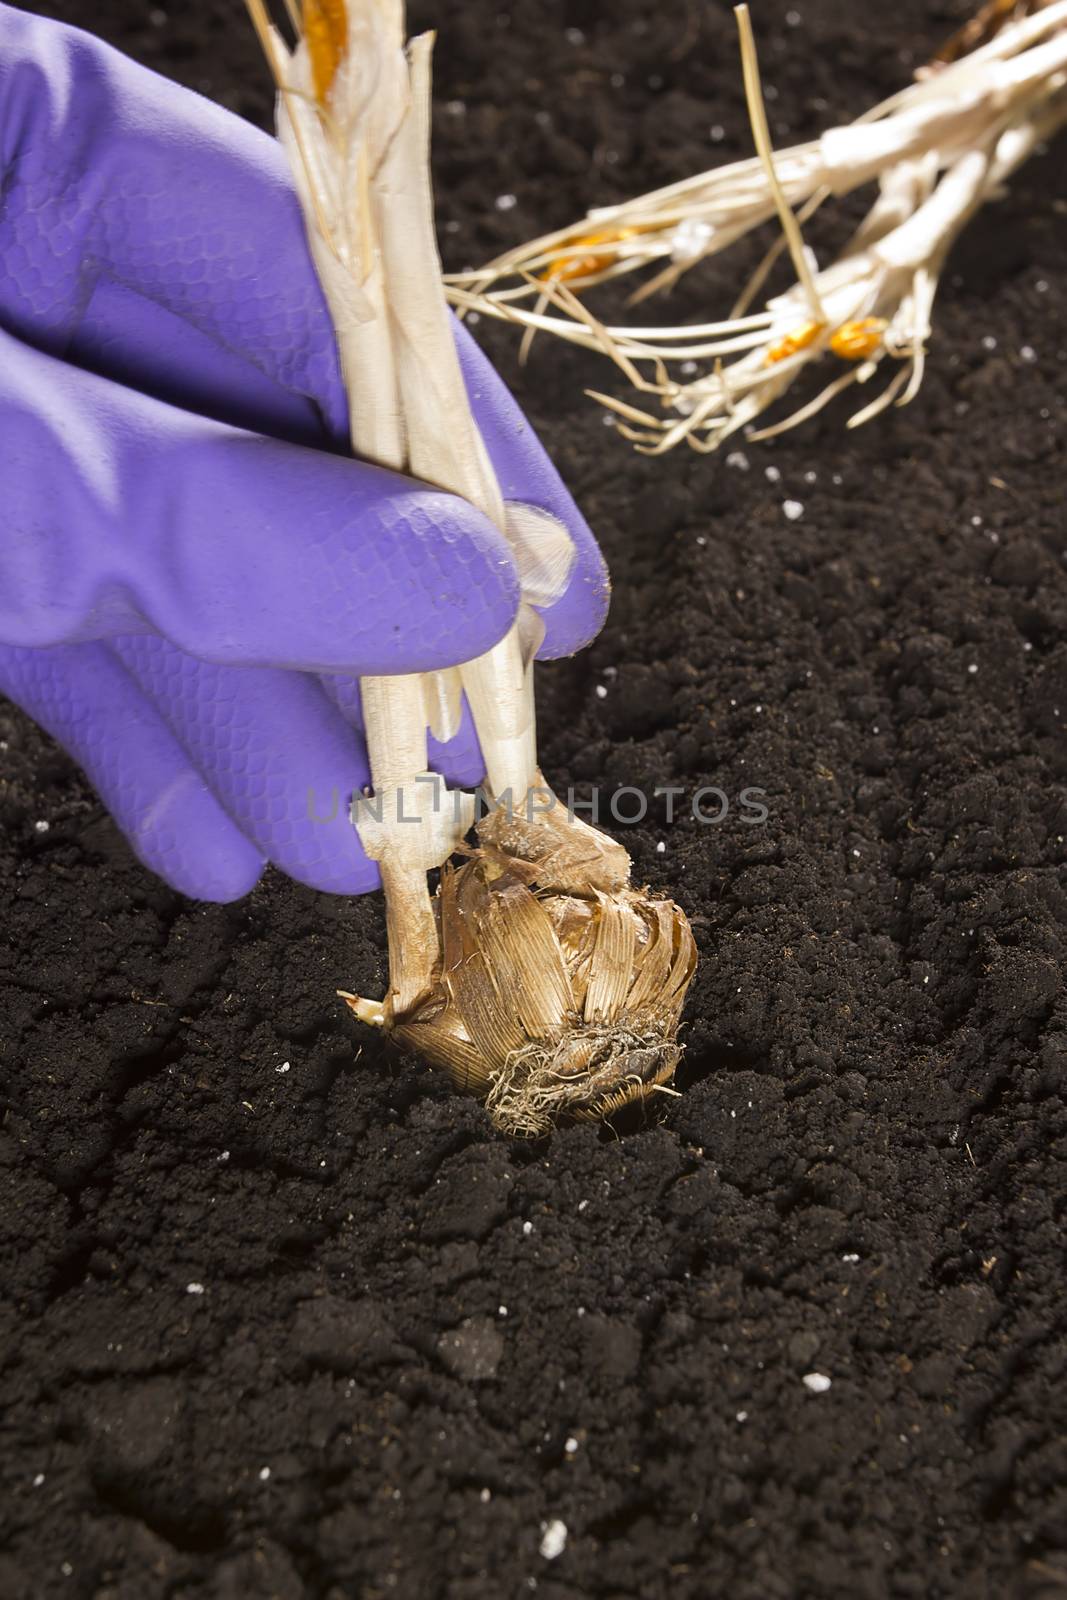 Planting flower bulbs in the ground with a rubber glove hand